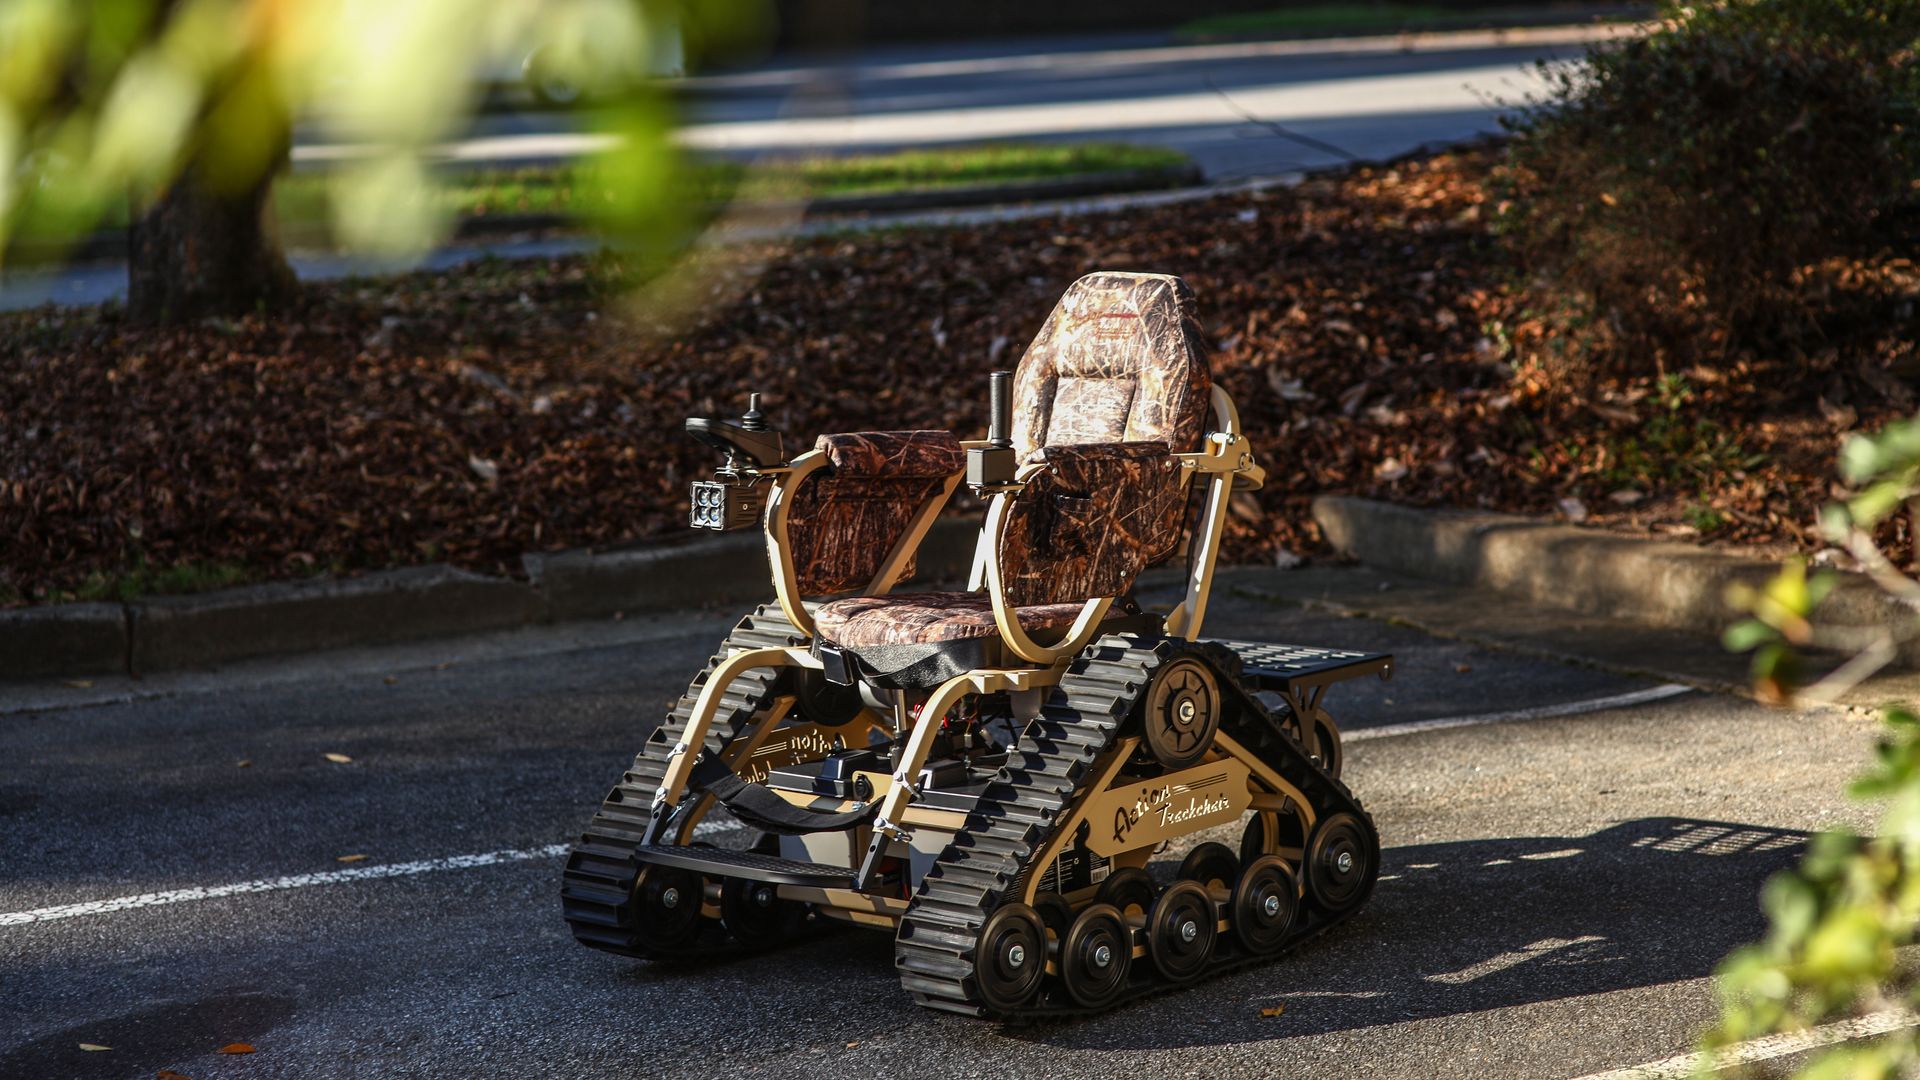 A special wheelchair for outdoor use